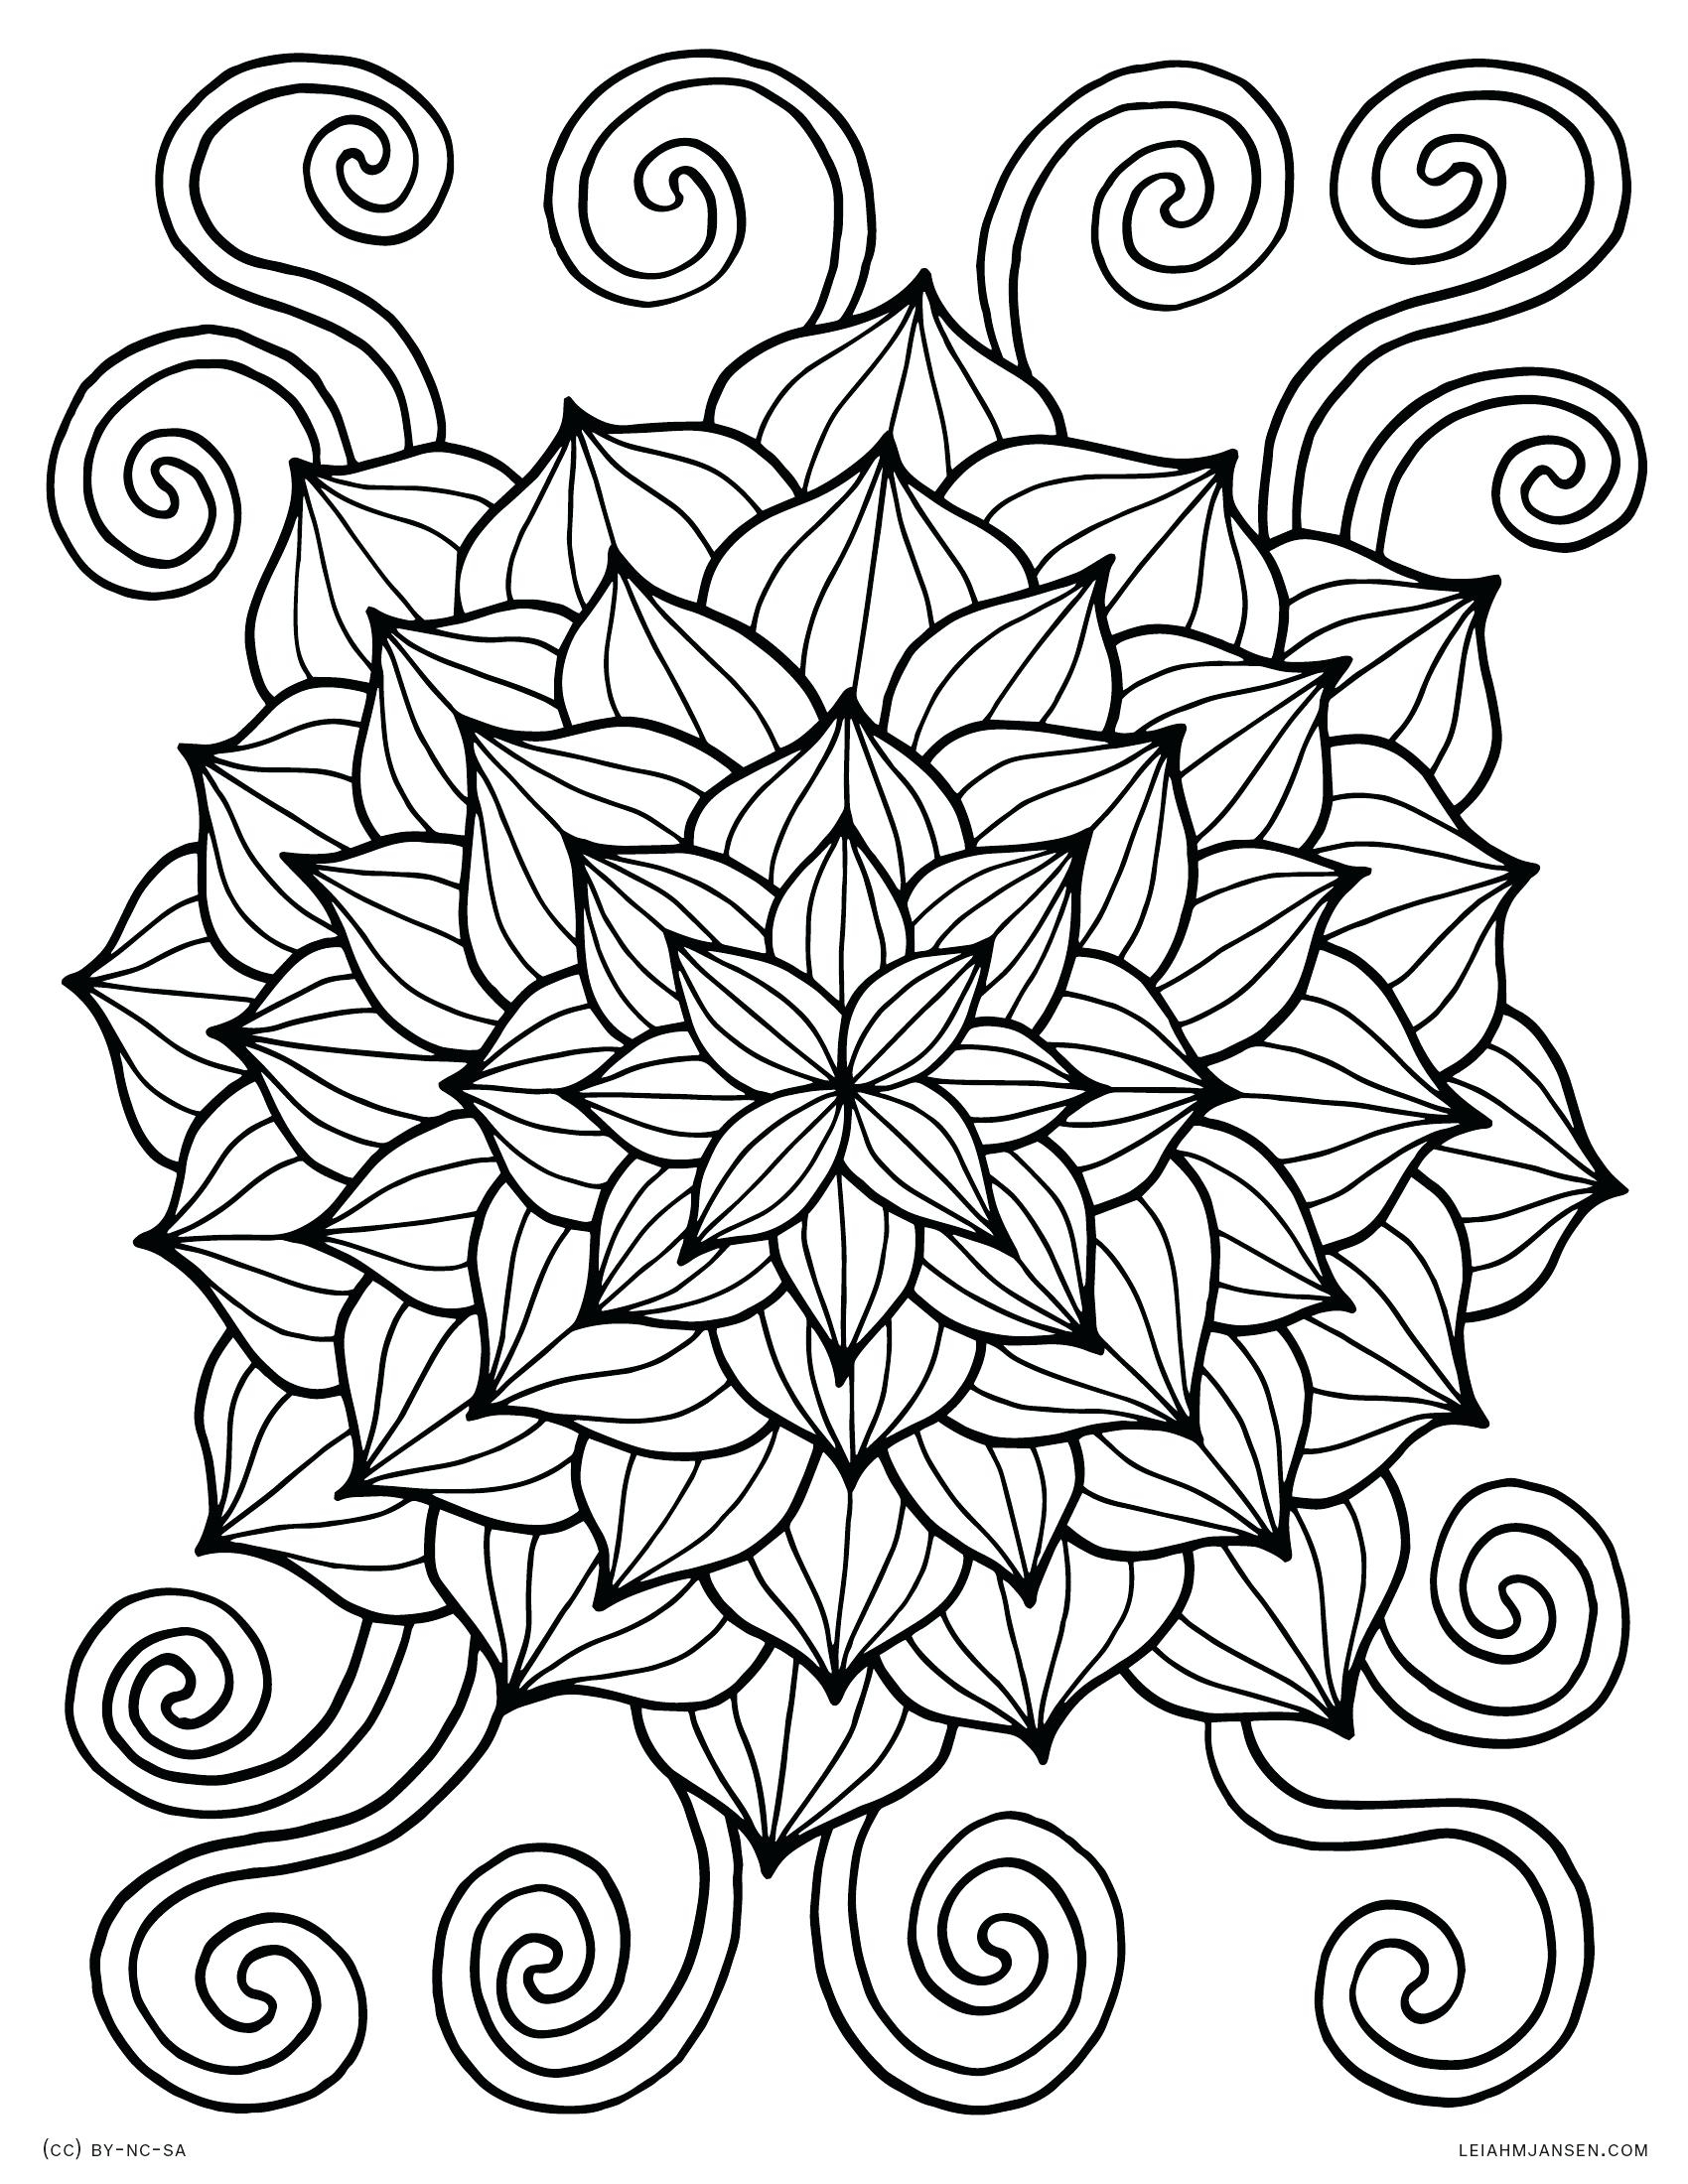 Abstract Flowers Coloring Pages at GetColorings.com | Free ...